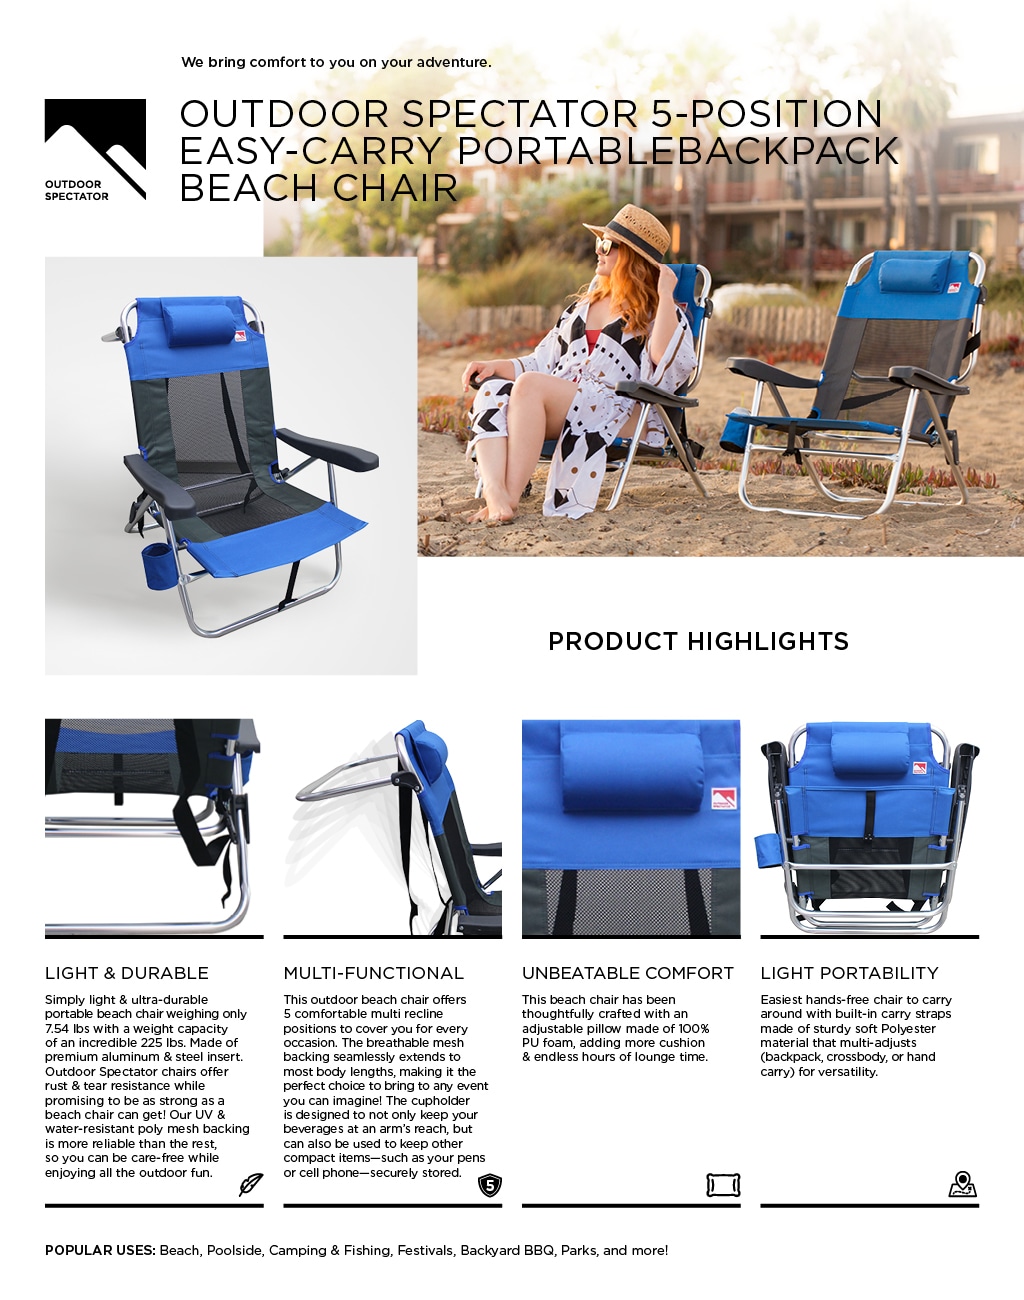 2 Red Outdoor Patio Folding Beach Chair Camping Chair Arm Lightweight Portable 